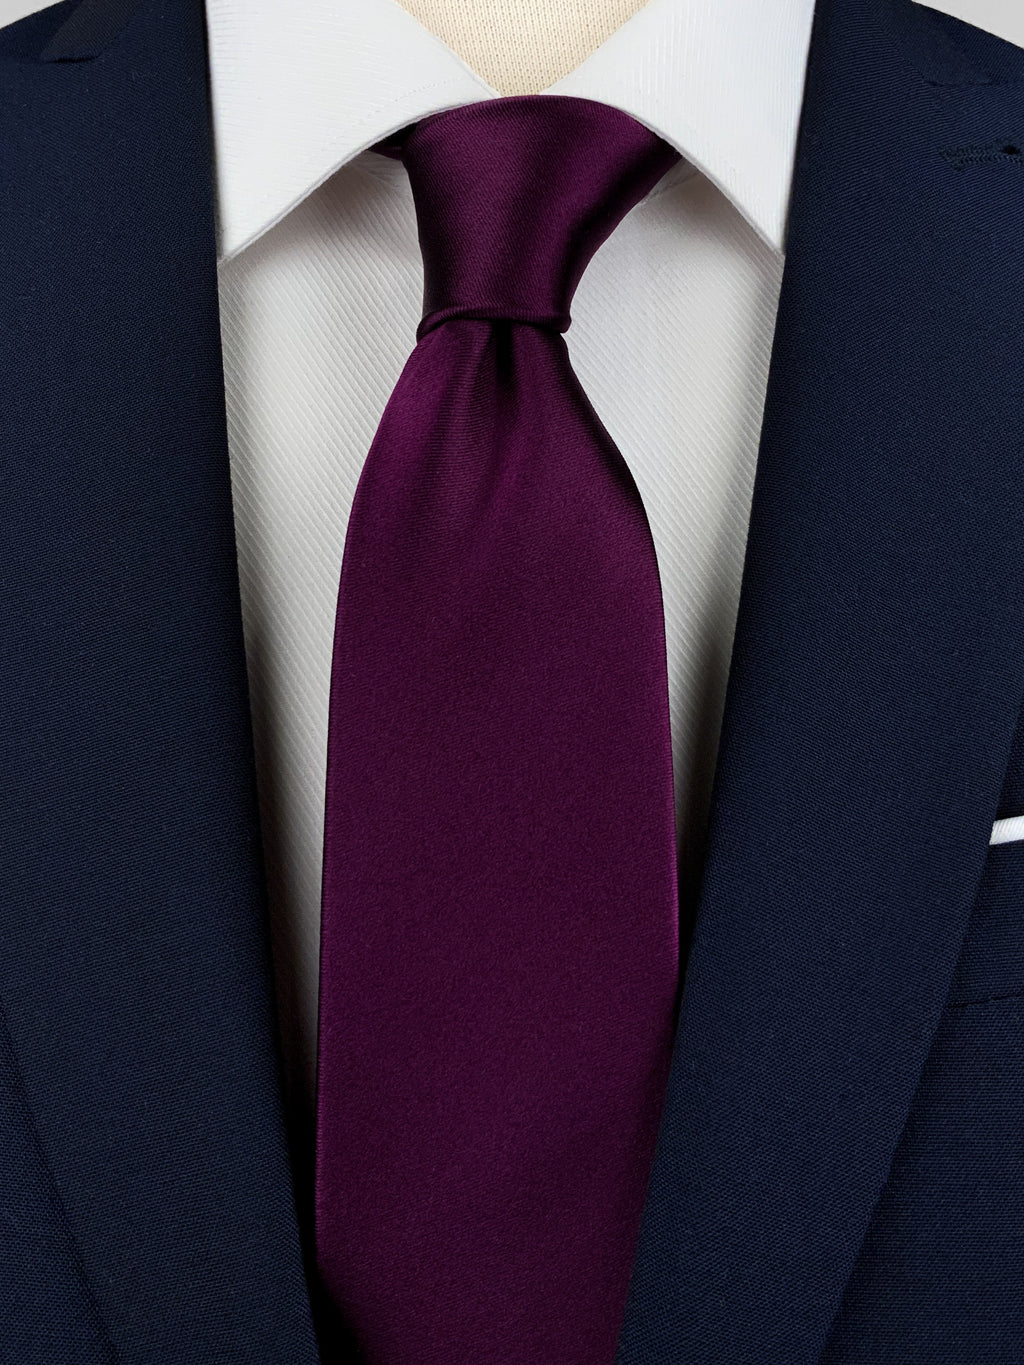 Dark purple mulberry silk satin tie worn with a white shirt and a navy blue suit